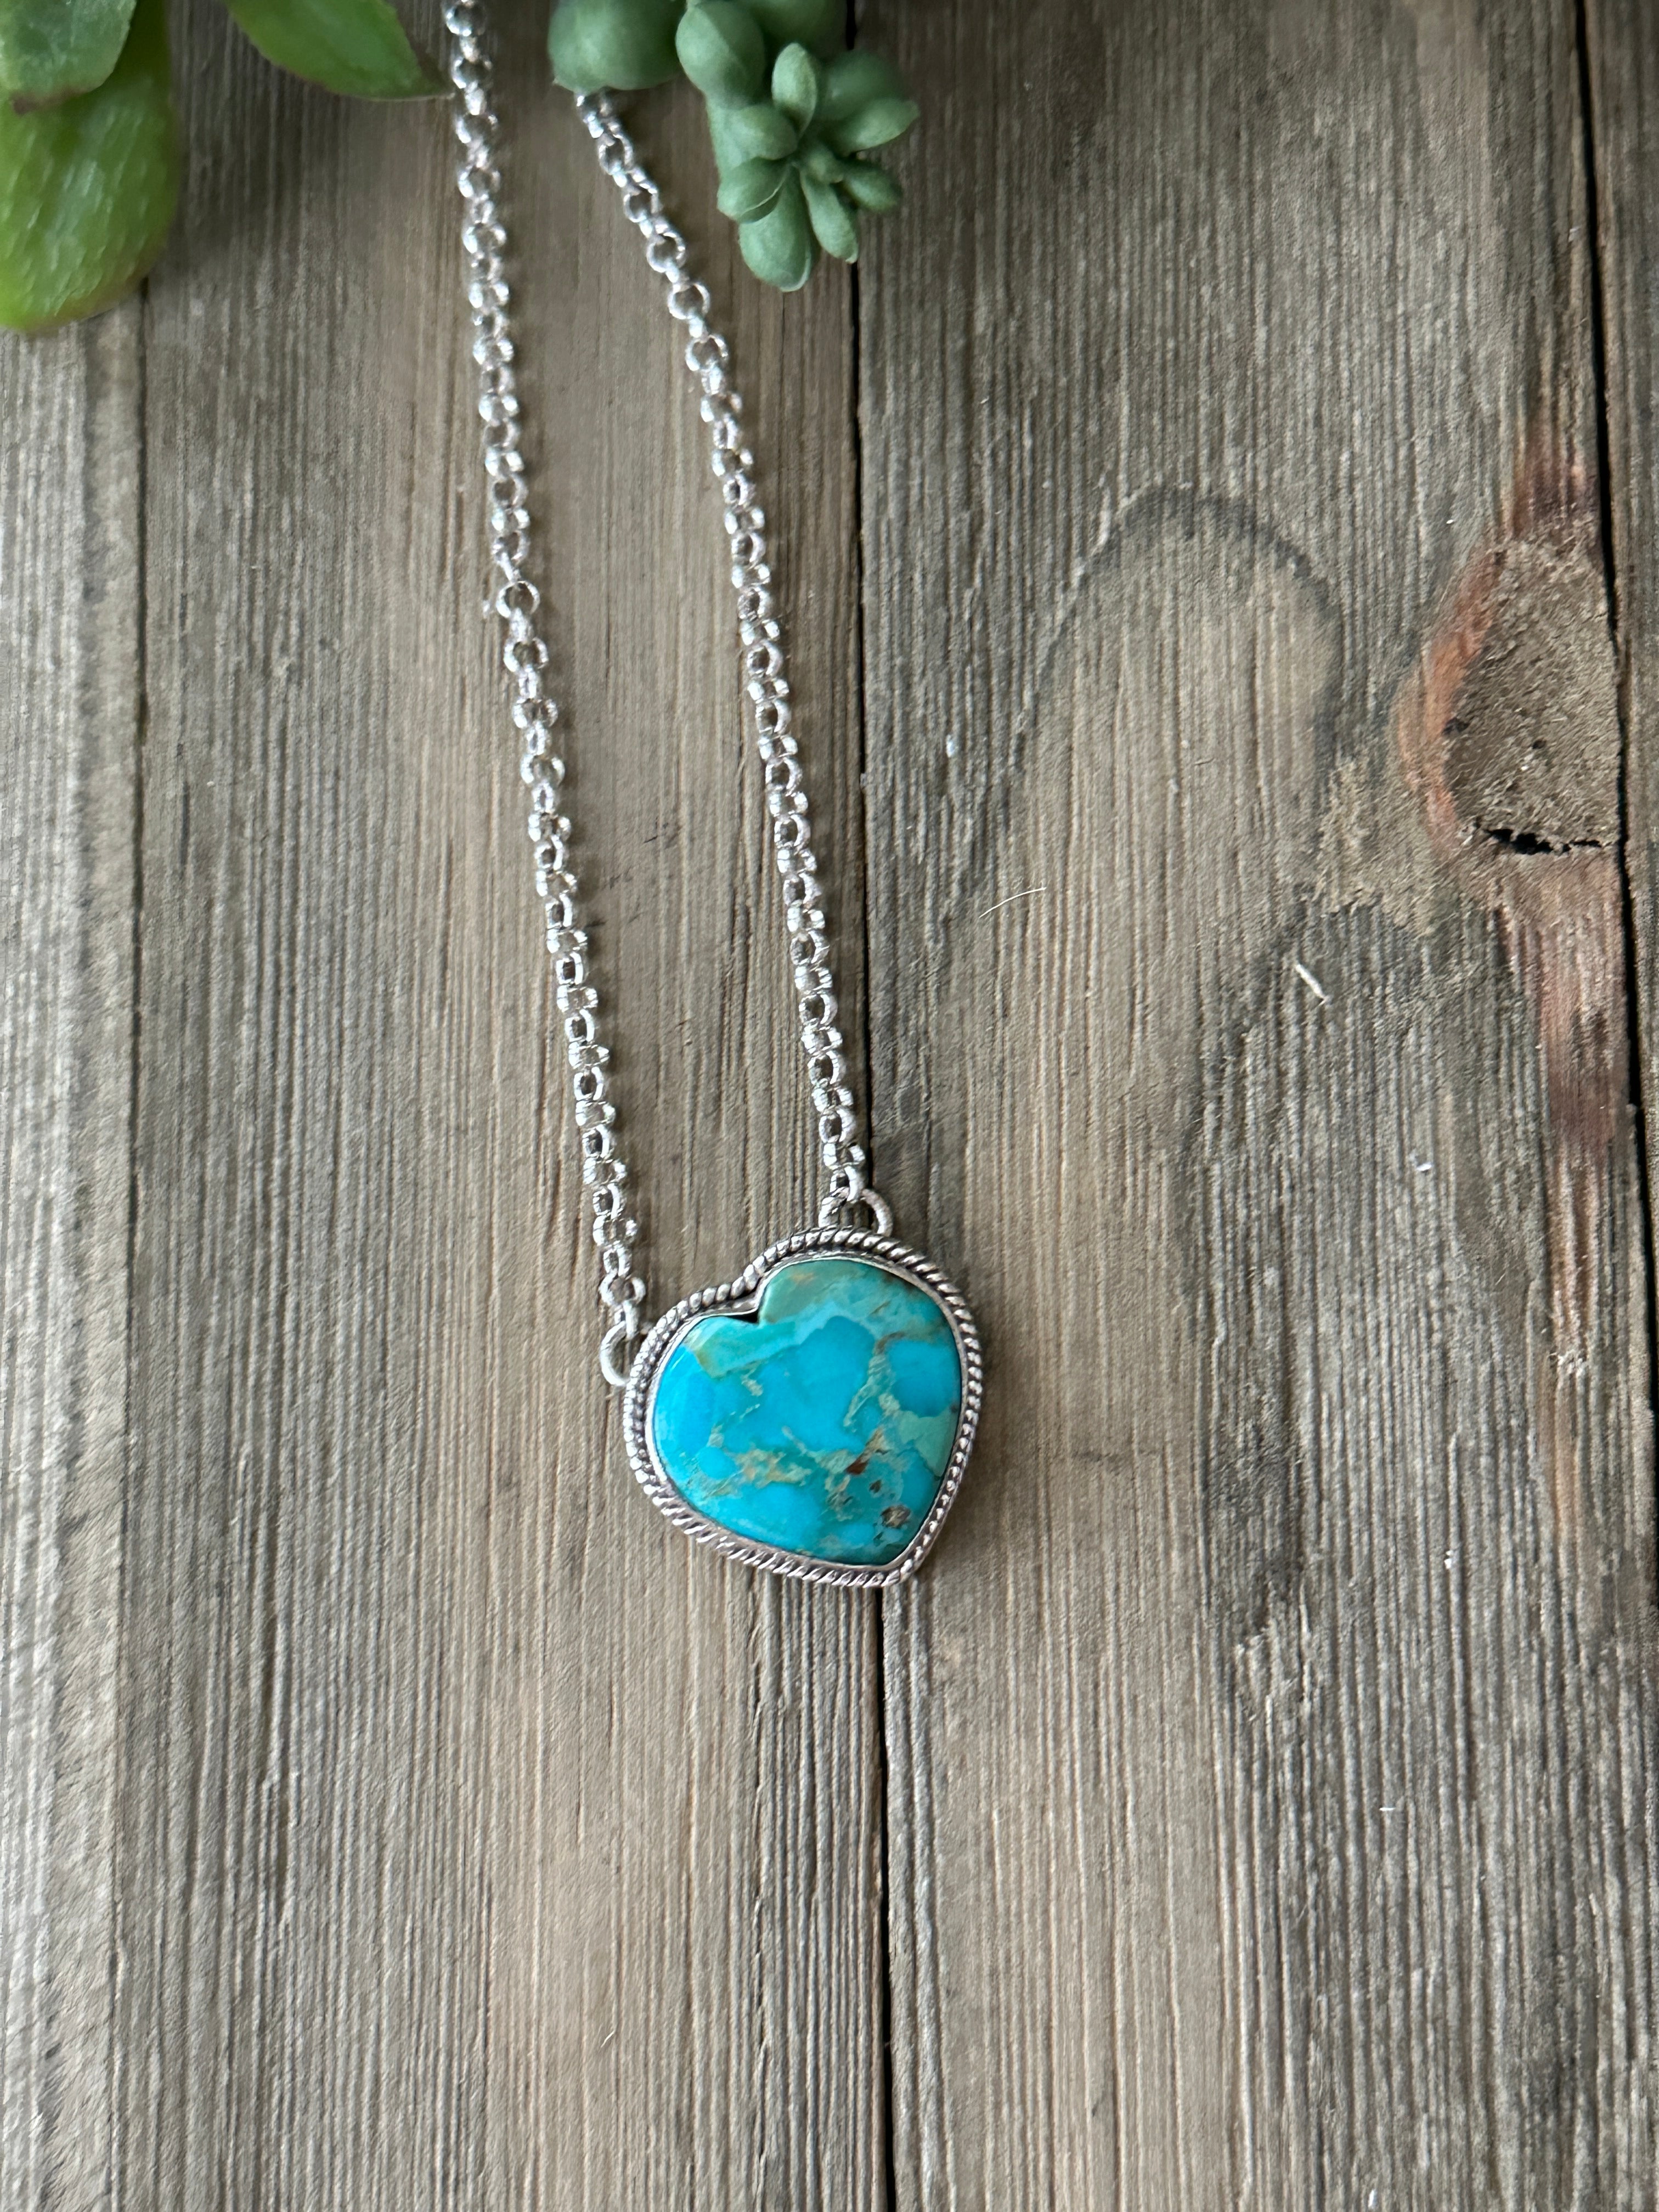 Southwest Made Turquoise & Sterling Silver Heart Necklace